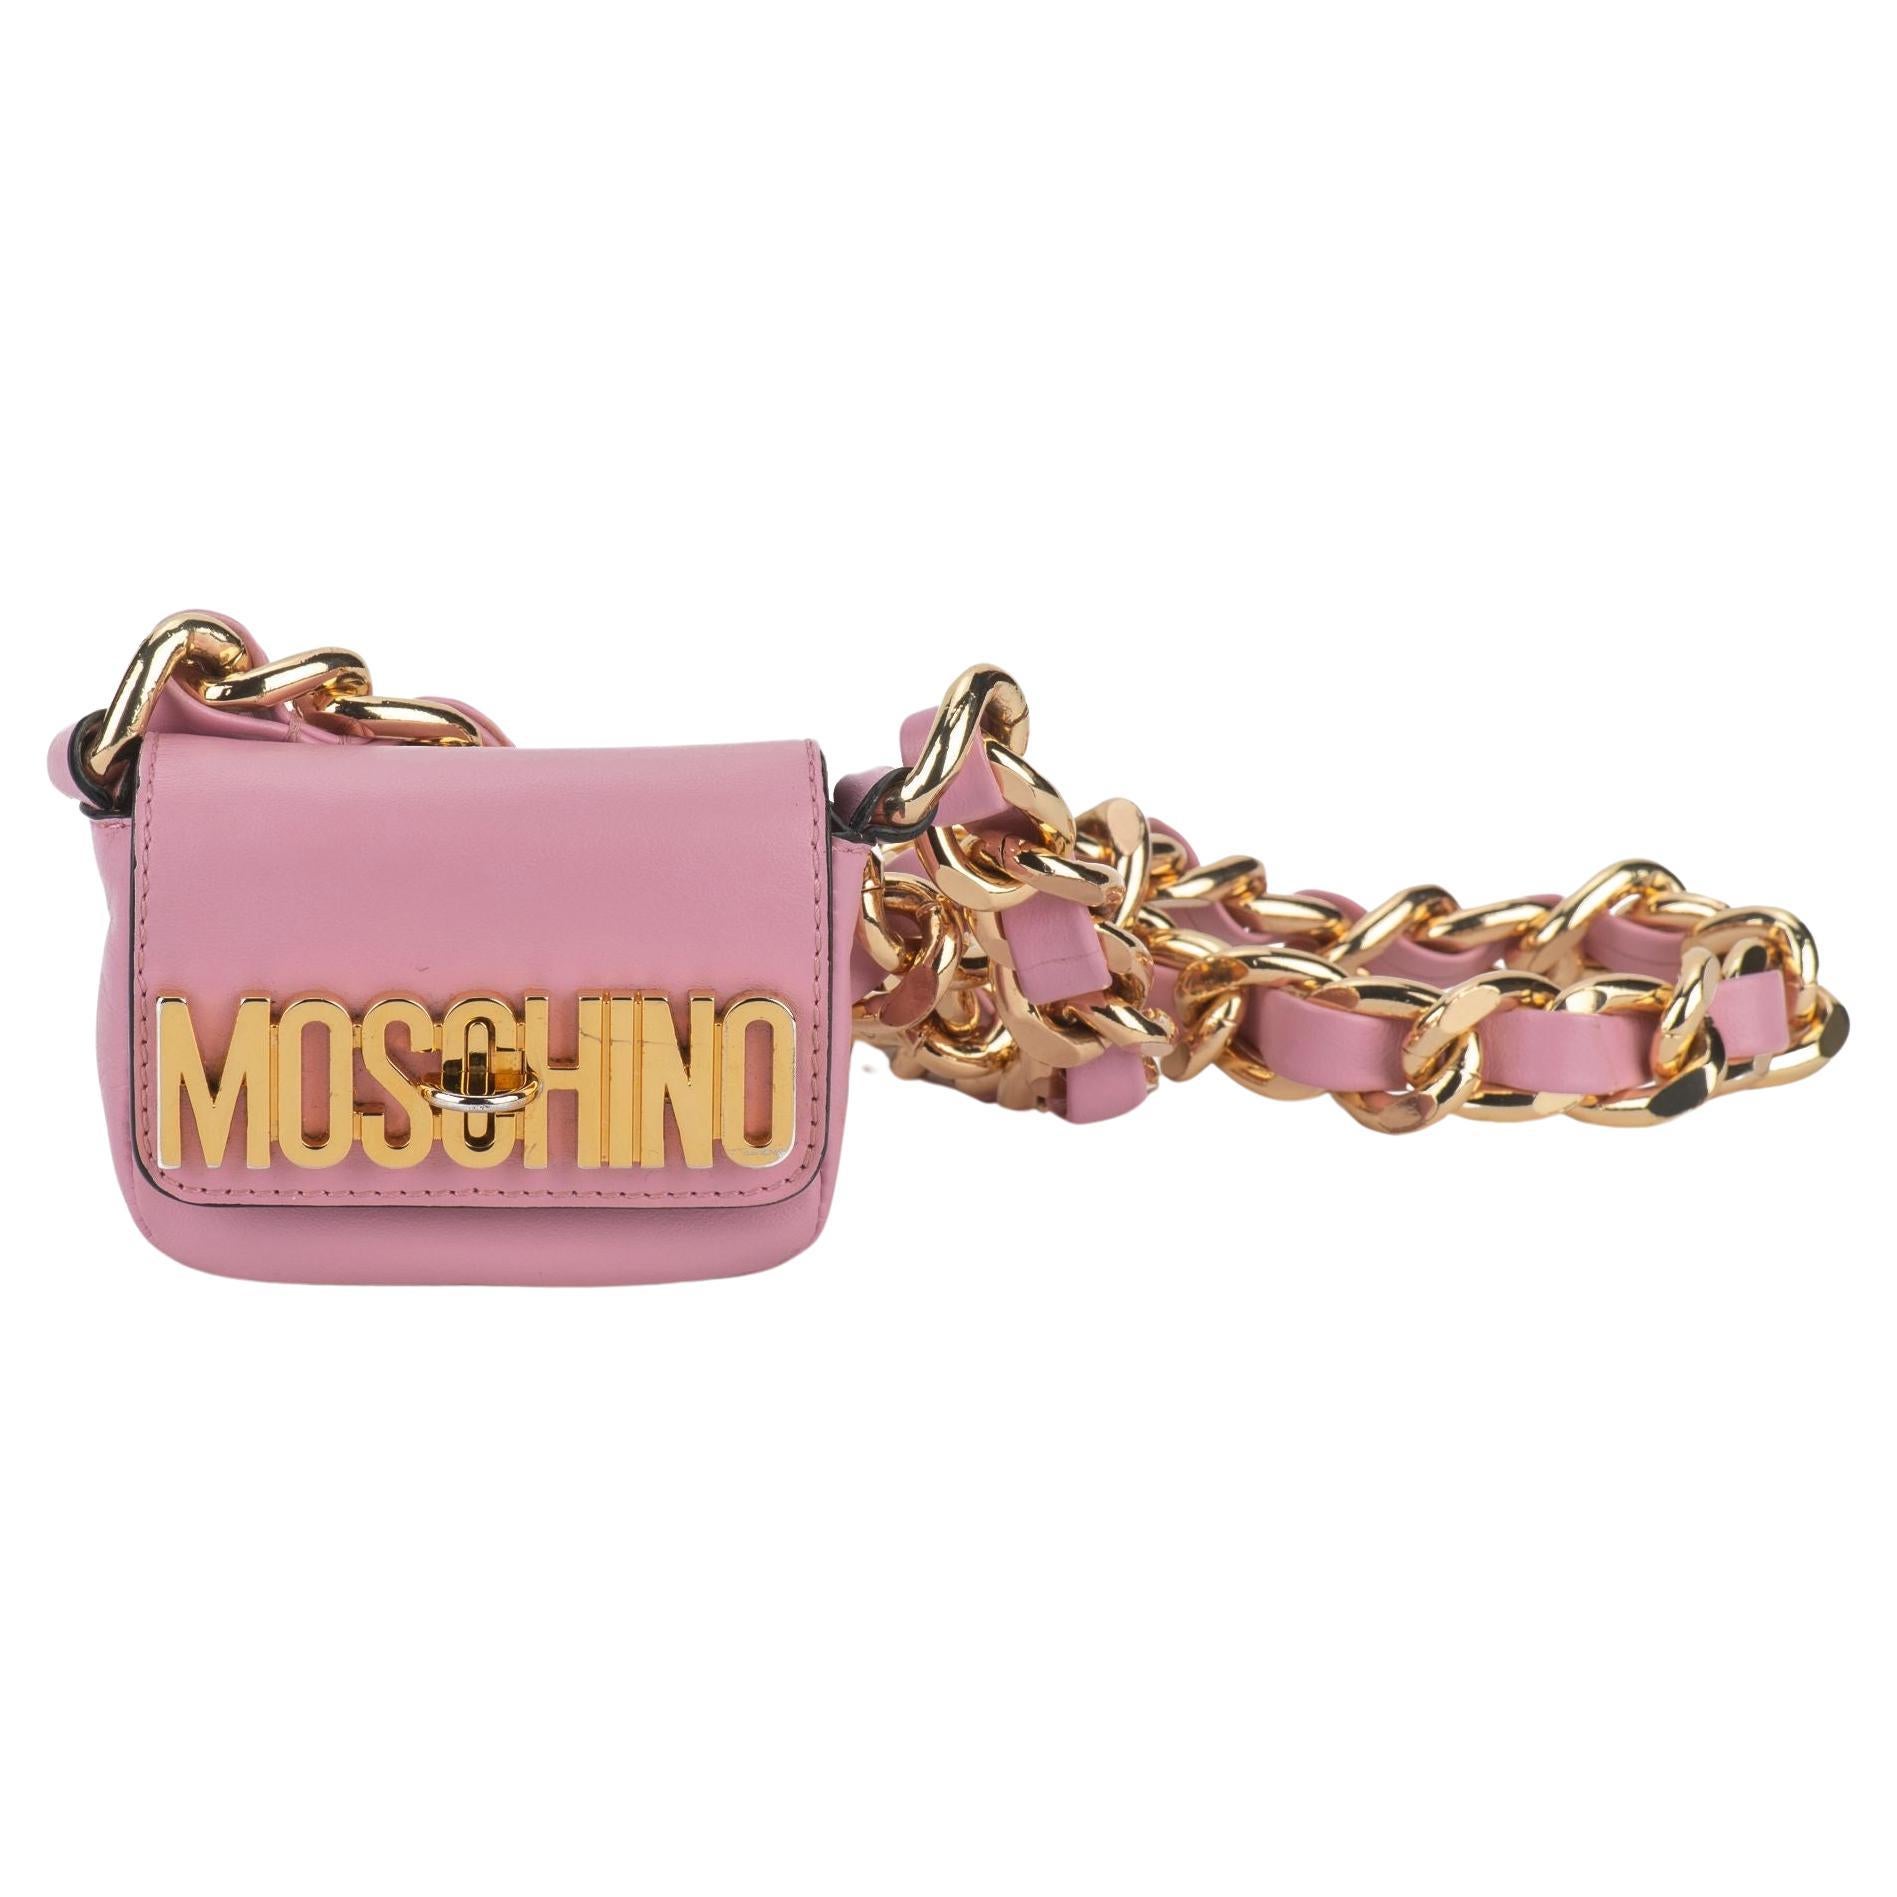 Moschino Bubble Pink Mini Bag For Sale